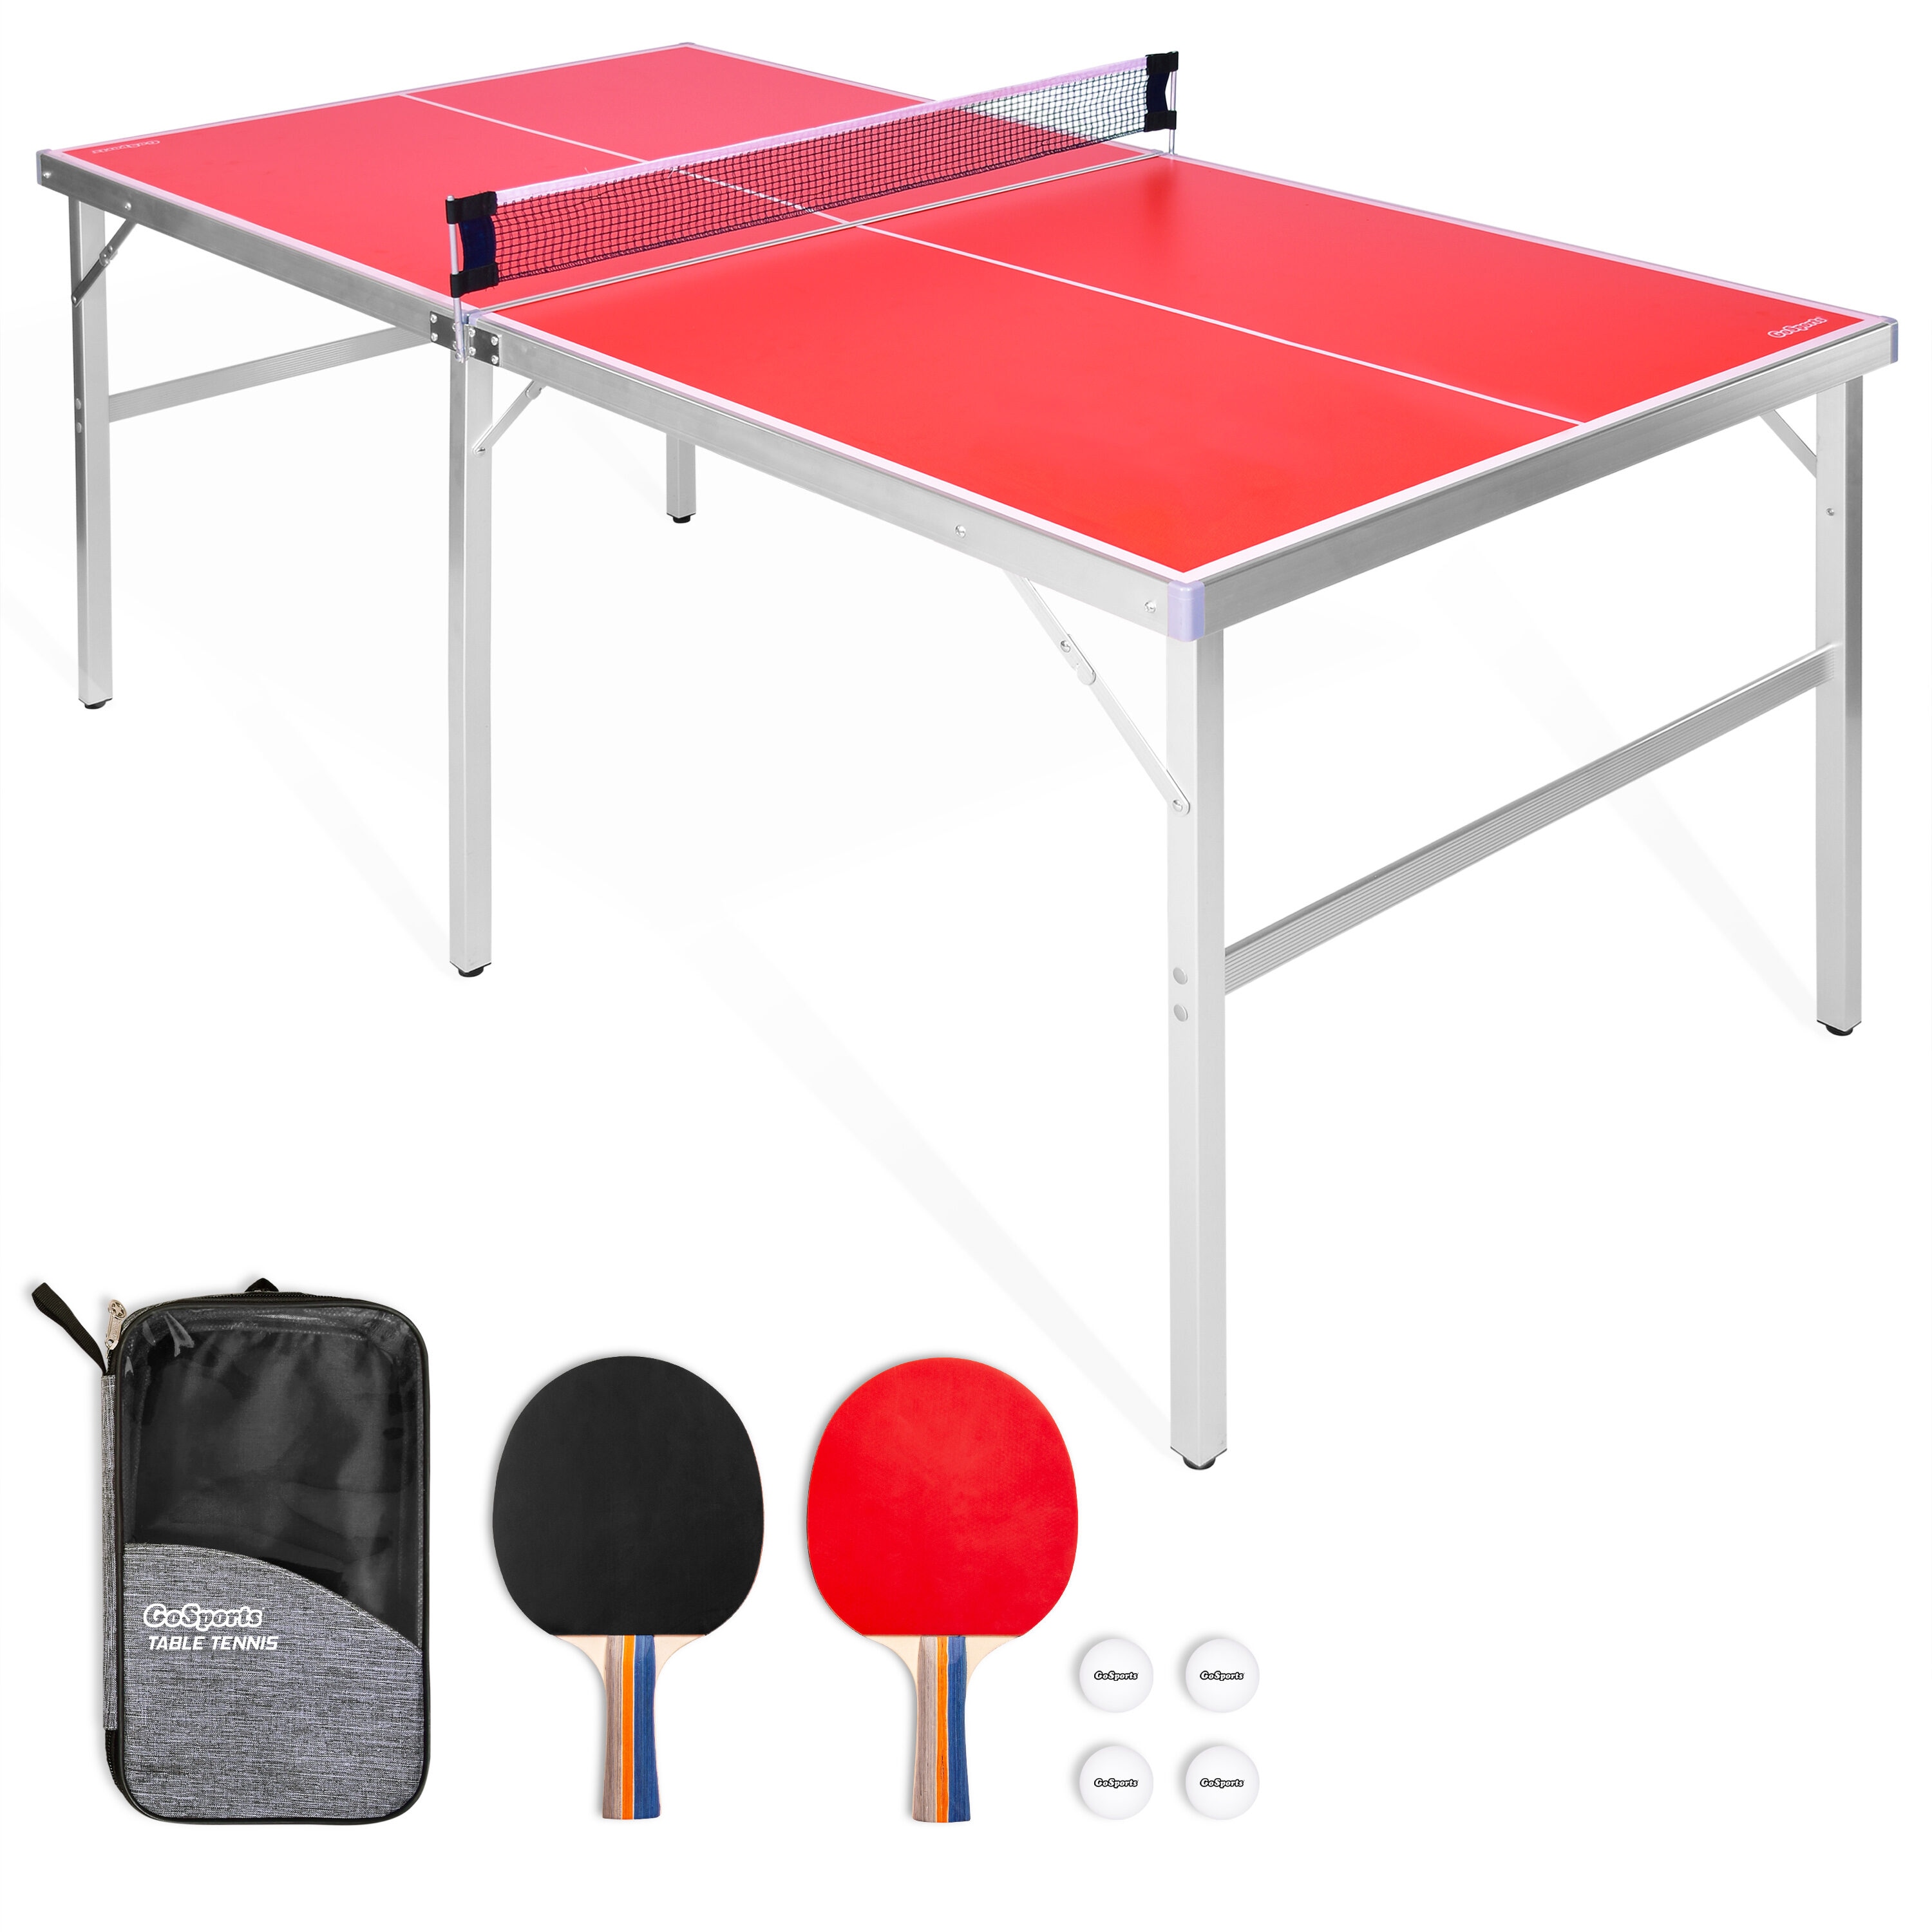 MD Sports Official Size 2-piece Table Tennis Table with Table Cover